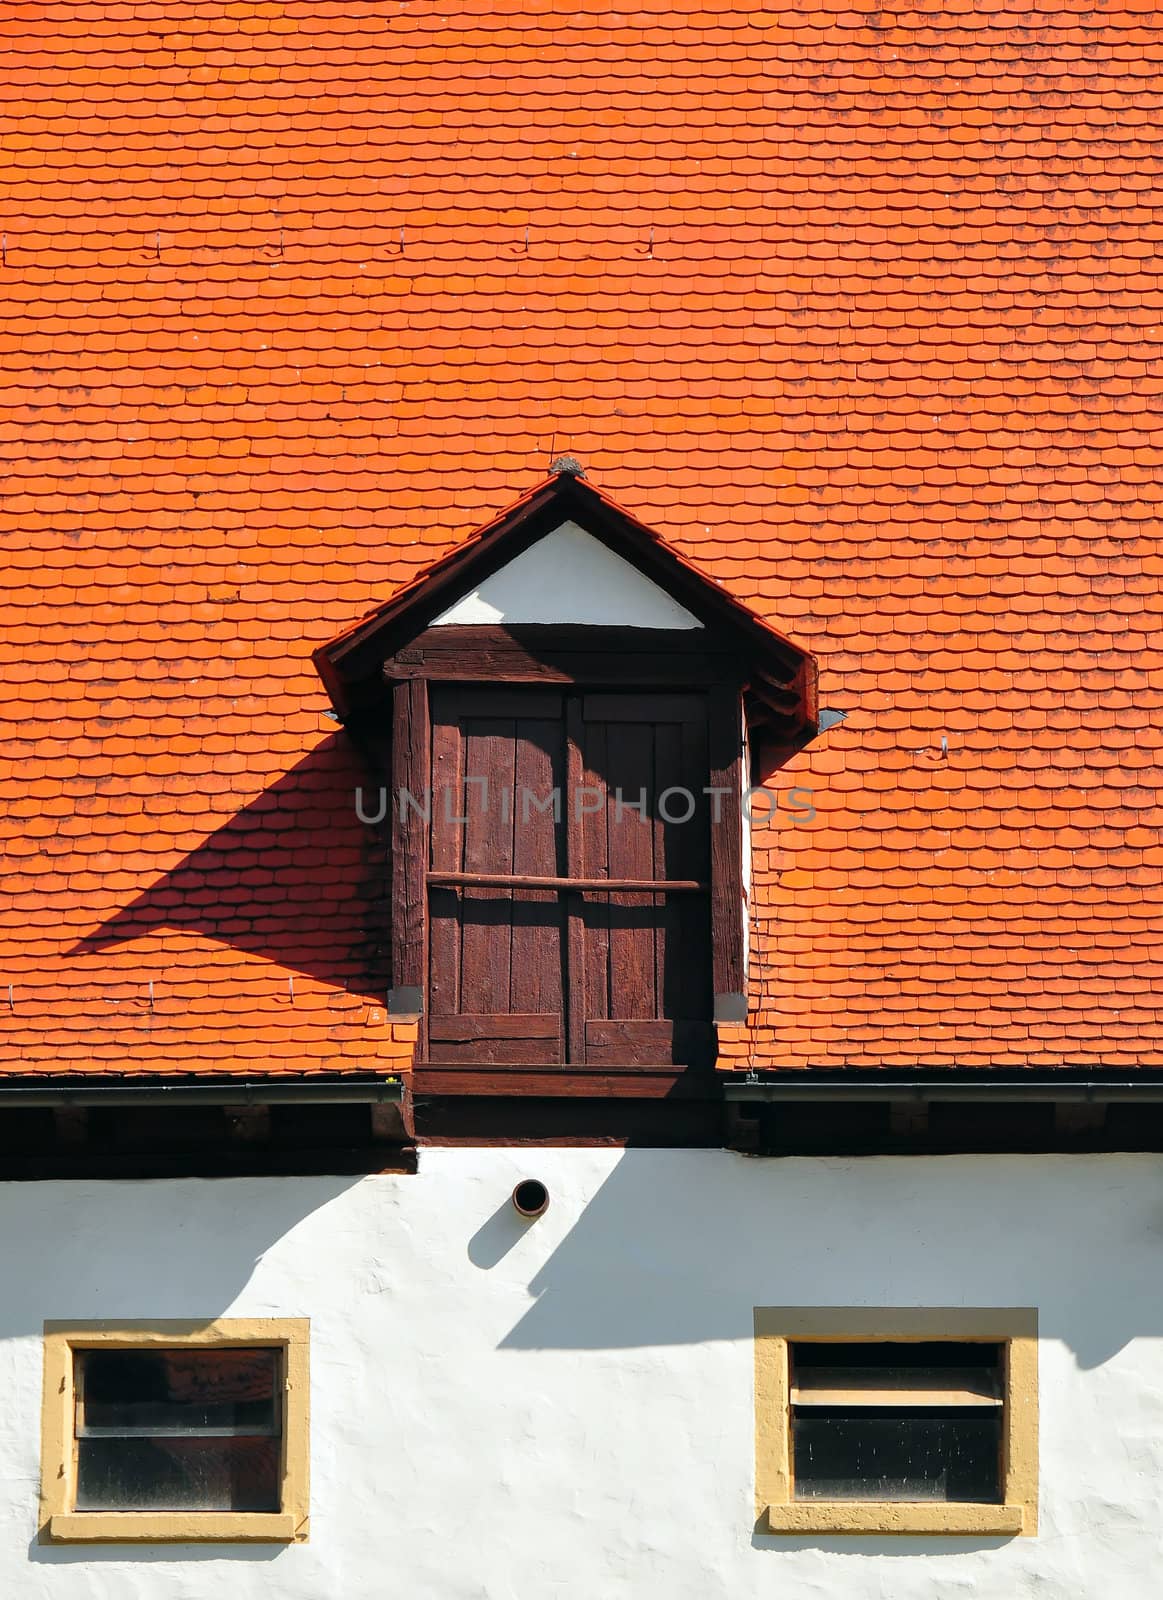 A close-up photo of a window found on a building in south west Germany